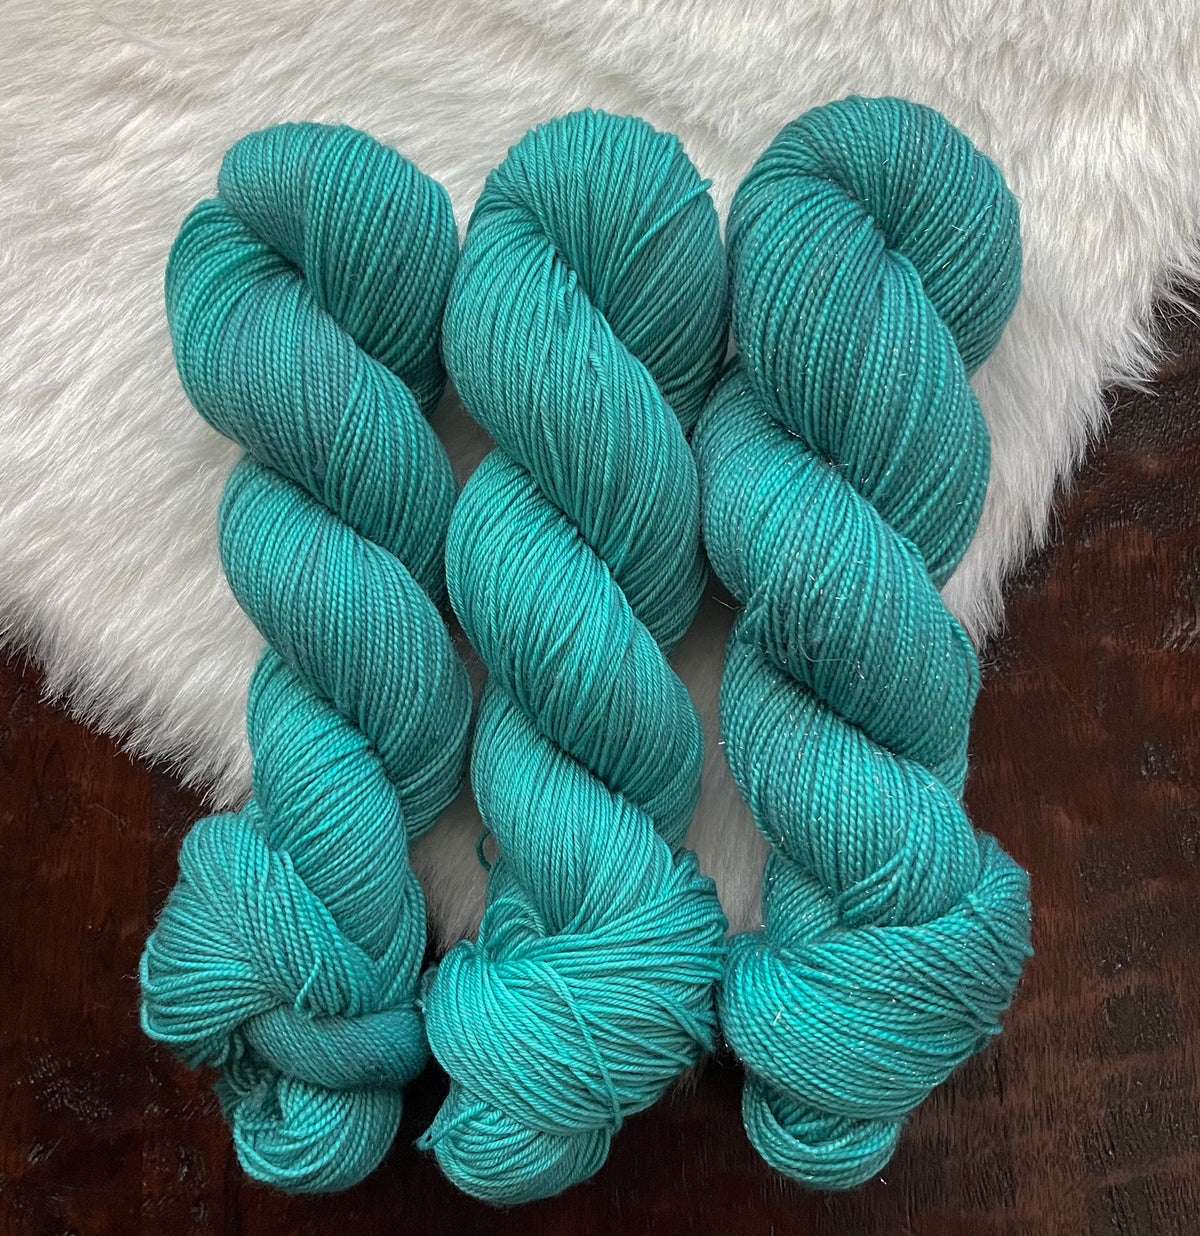 A LITTLE AMBIENCE  - Dyed to Order - Hand Dyed Yarn Skein